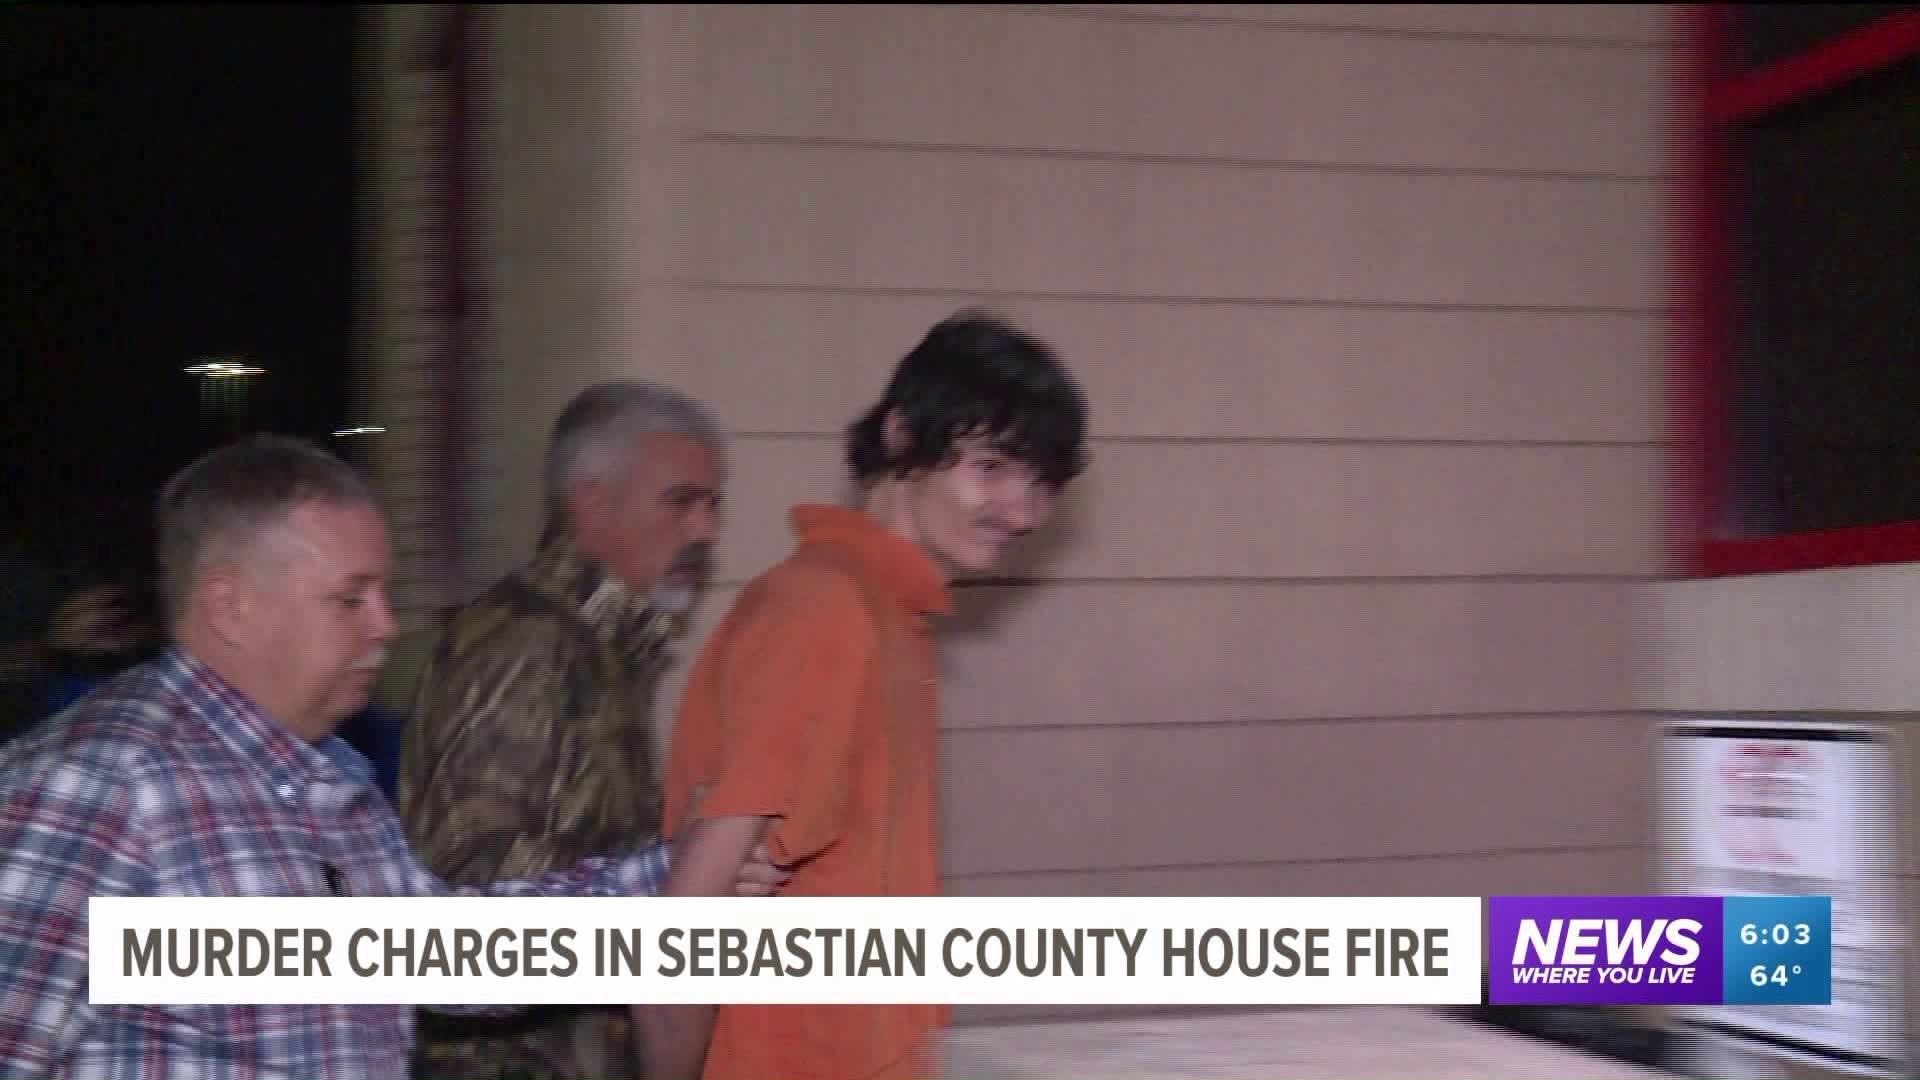 Man Charged With Two Counts Of First-Degree Murder In Sebastian County House Fire